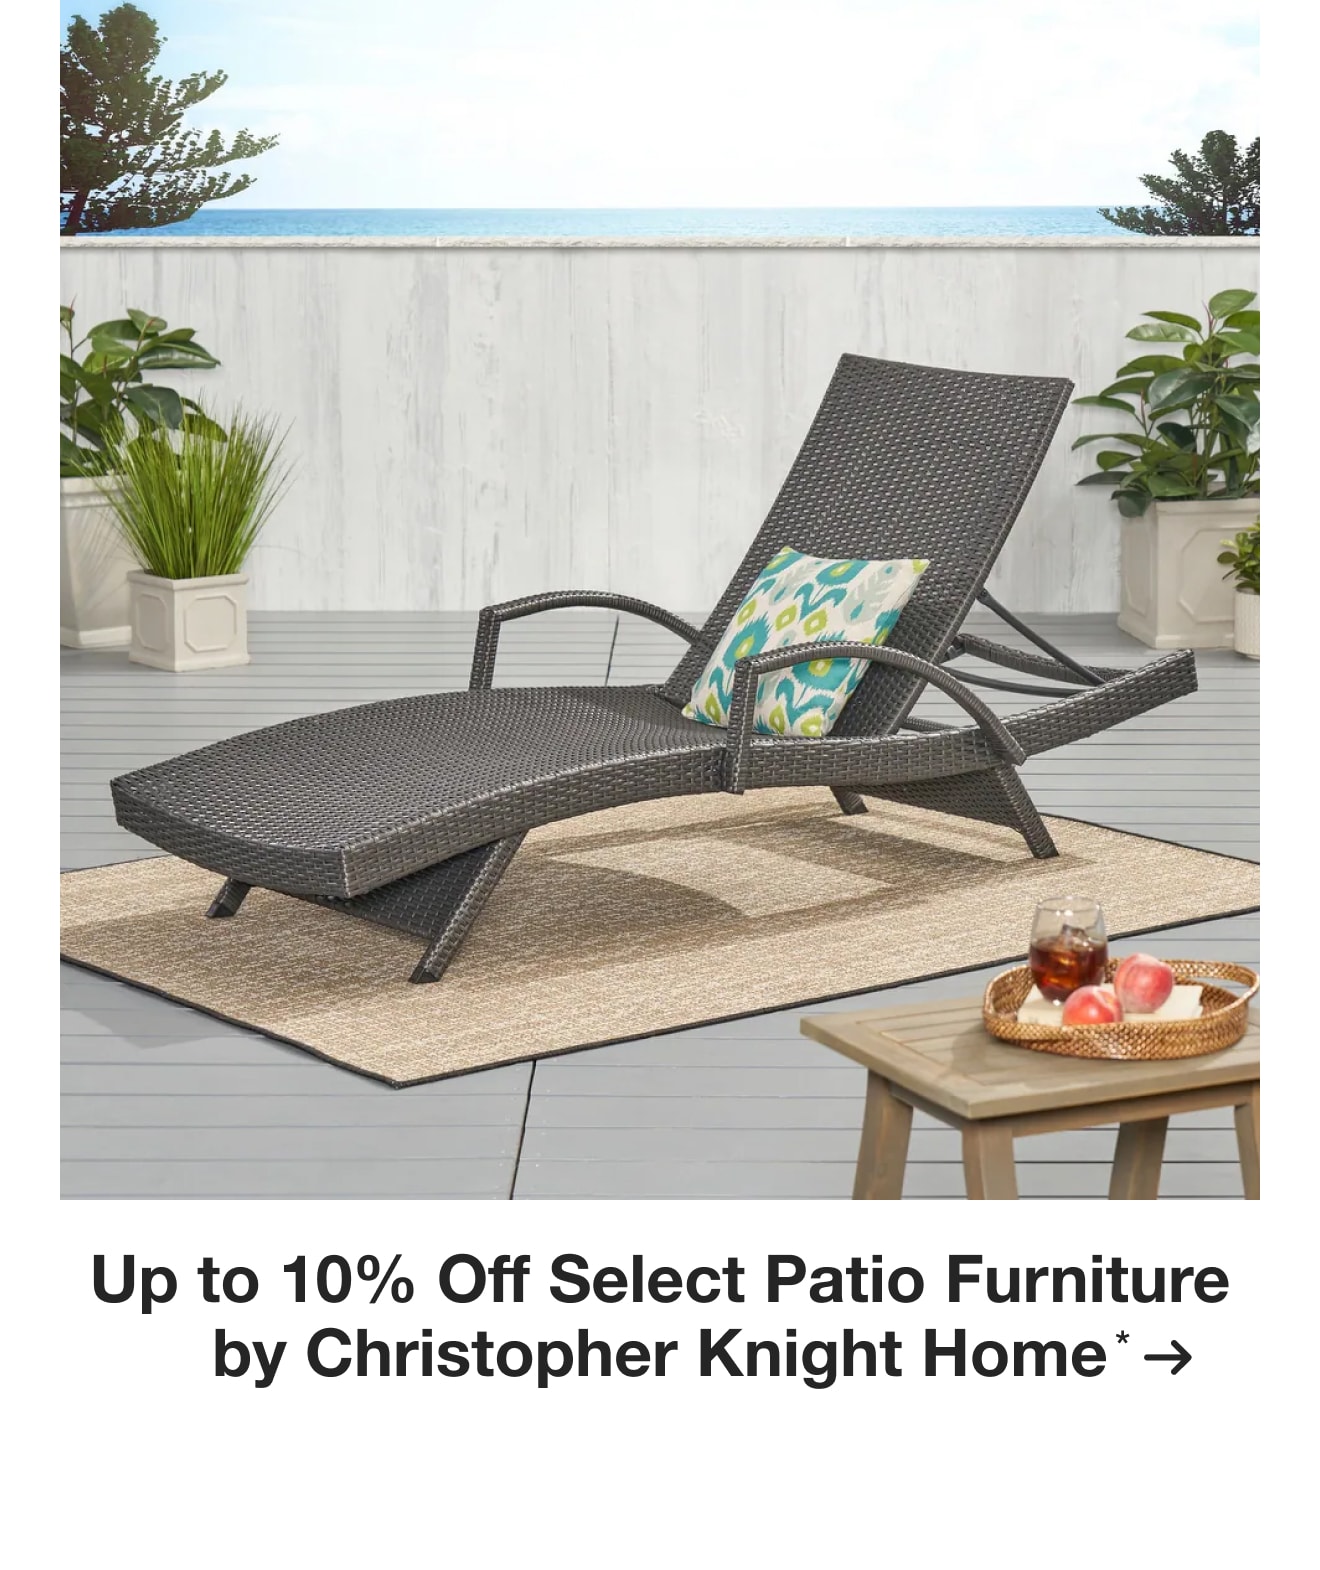 Up to 10% off Select Patio Furniture by Christopher Knight Home*